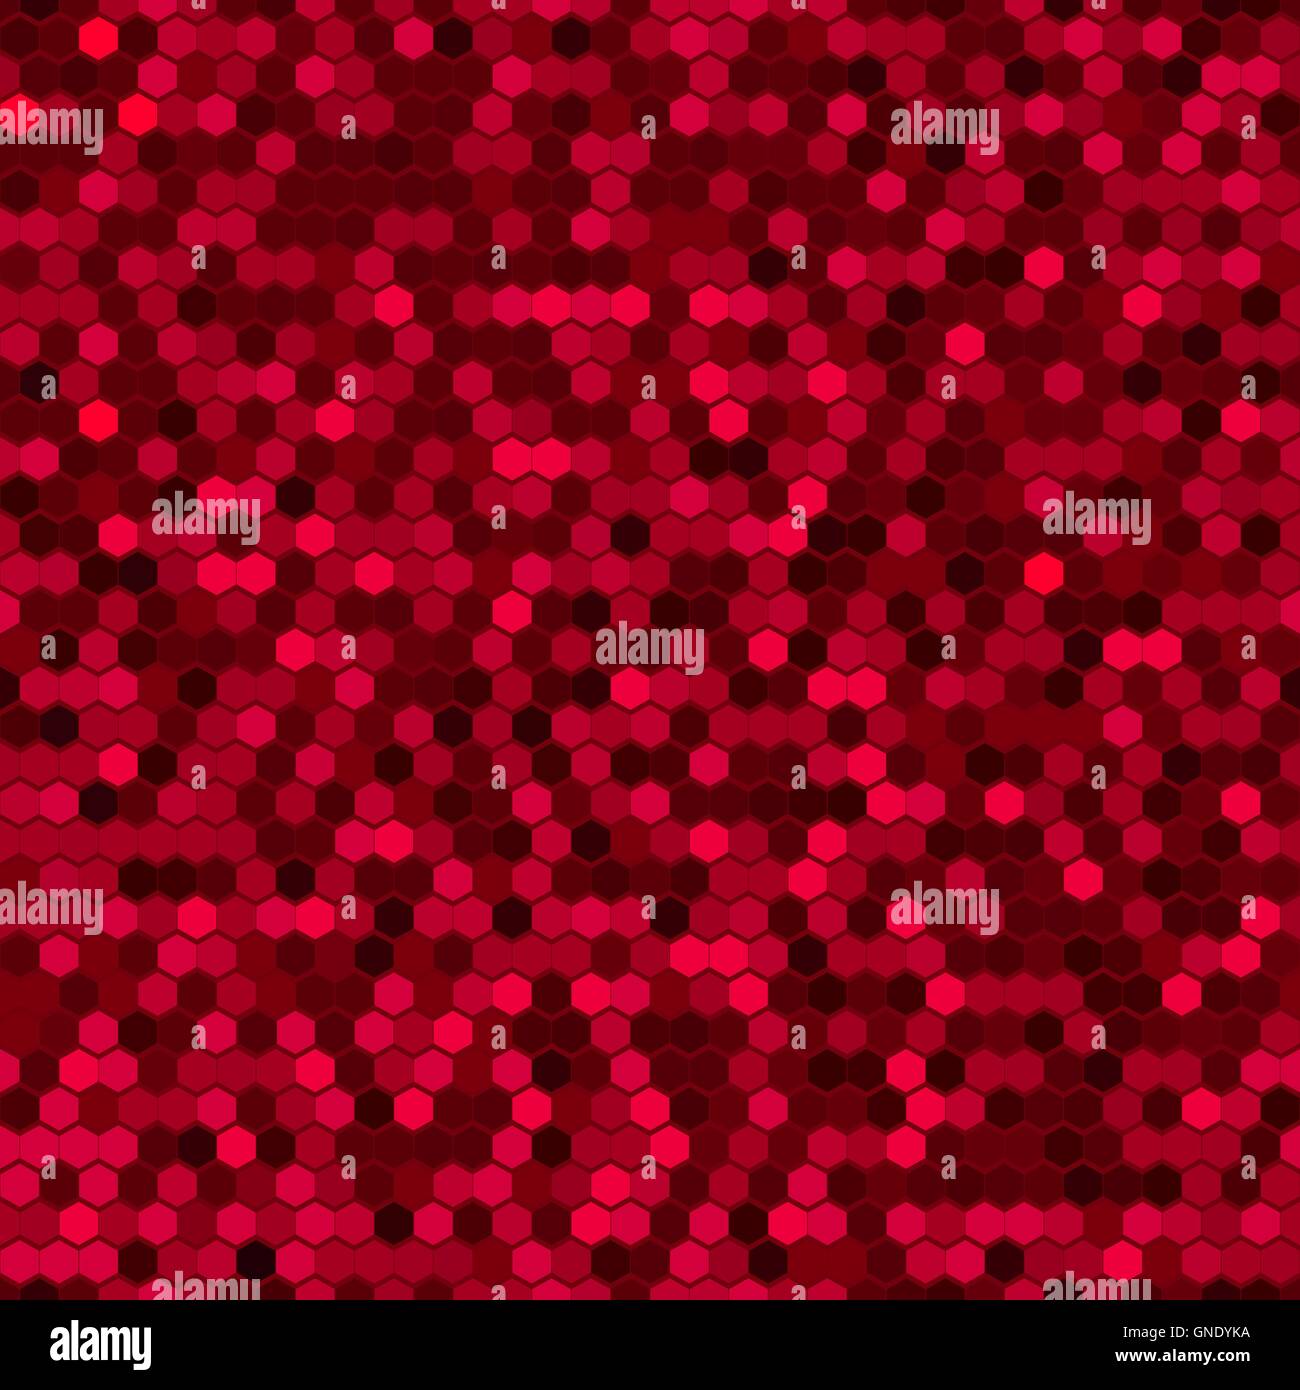 Abstract Red Seamless Vector Cell Pattern. Stock Vector